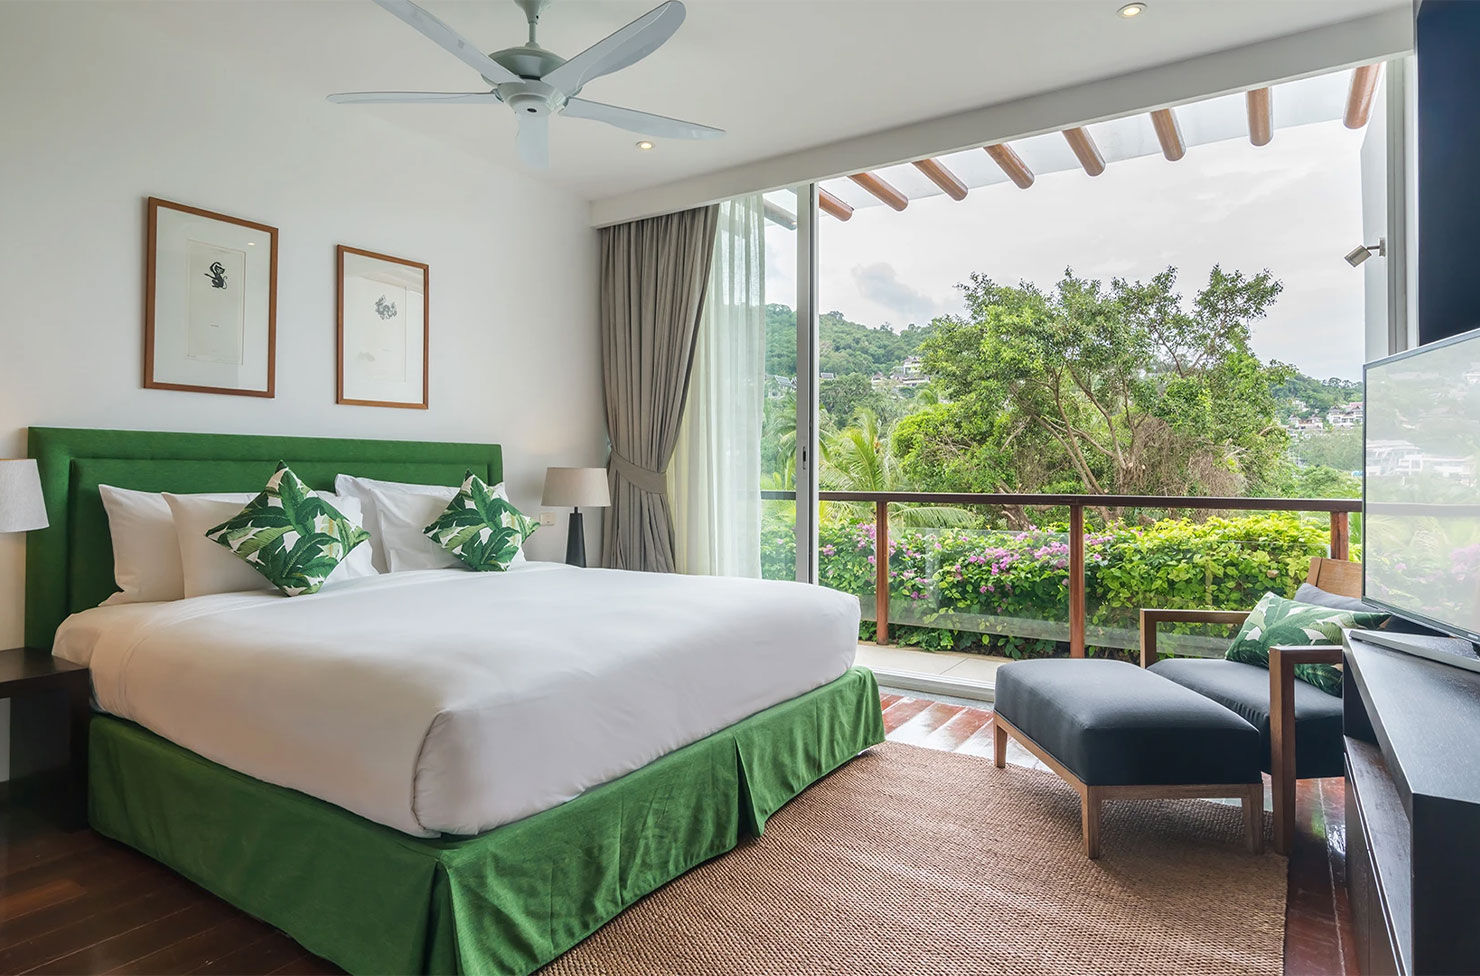 The Chava Resort, one of the best hotels in Phuket